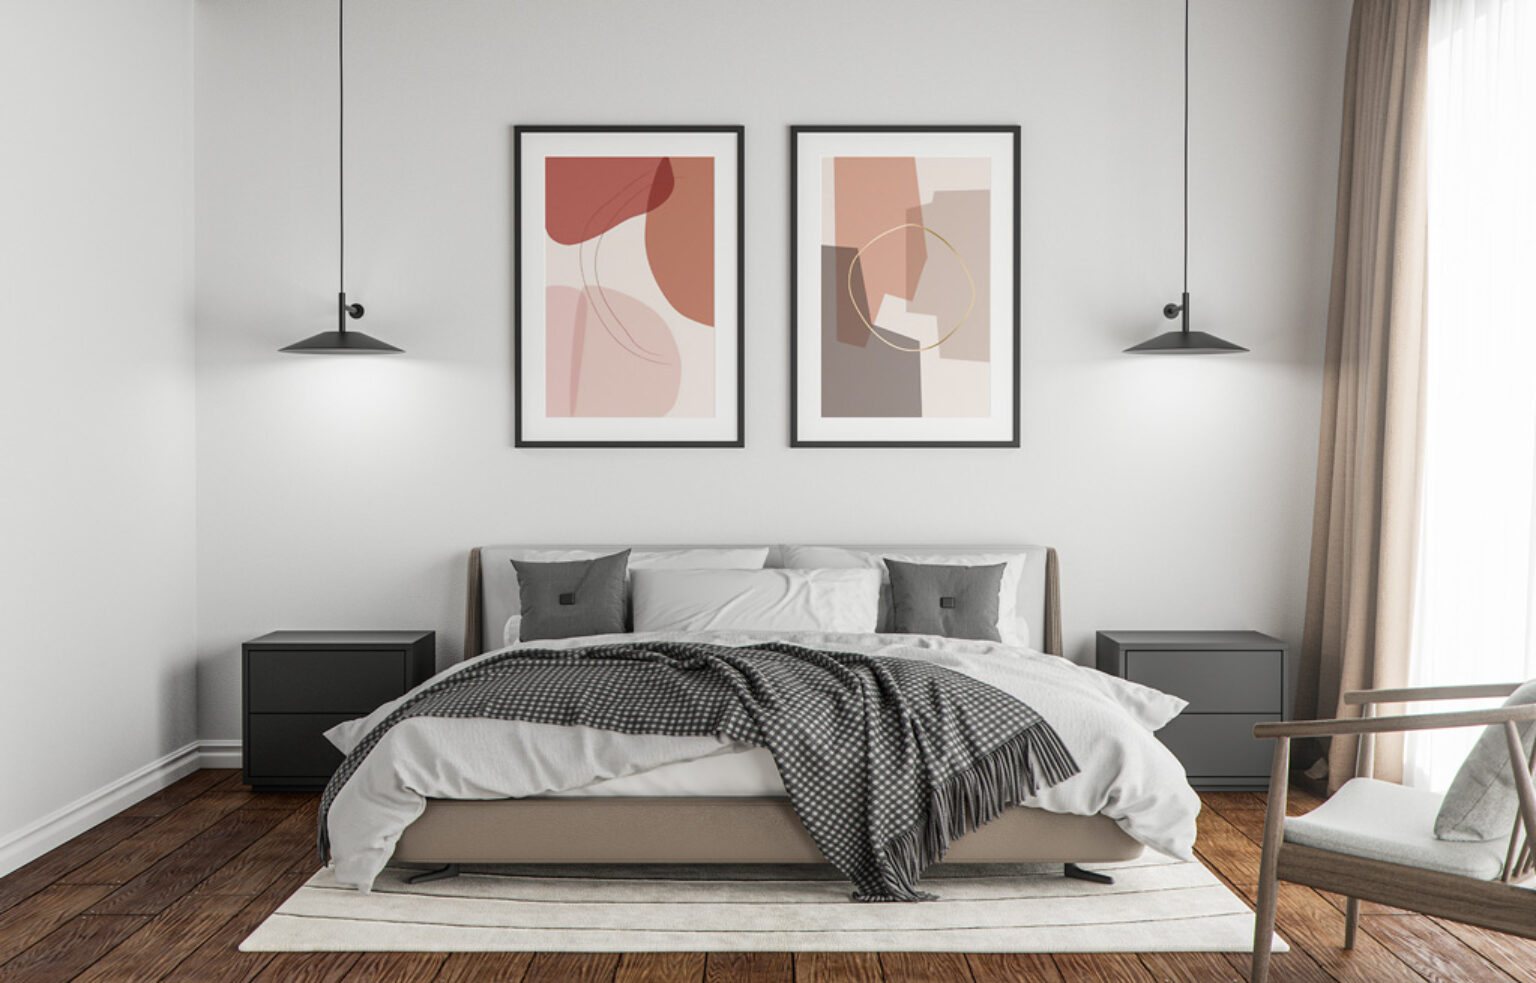 Uncover 78+ Enchanting Decorating Bedroom With Posters Trend Of The Year